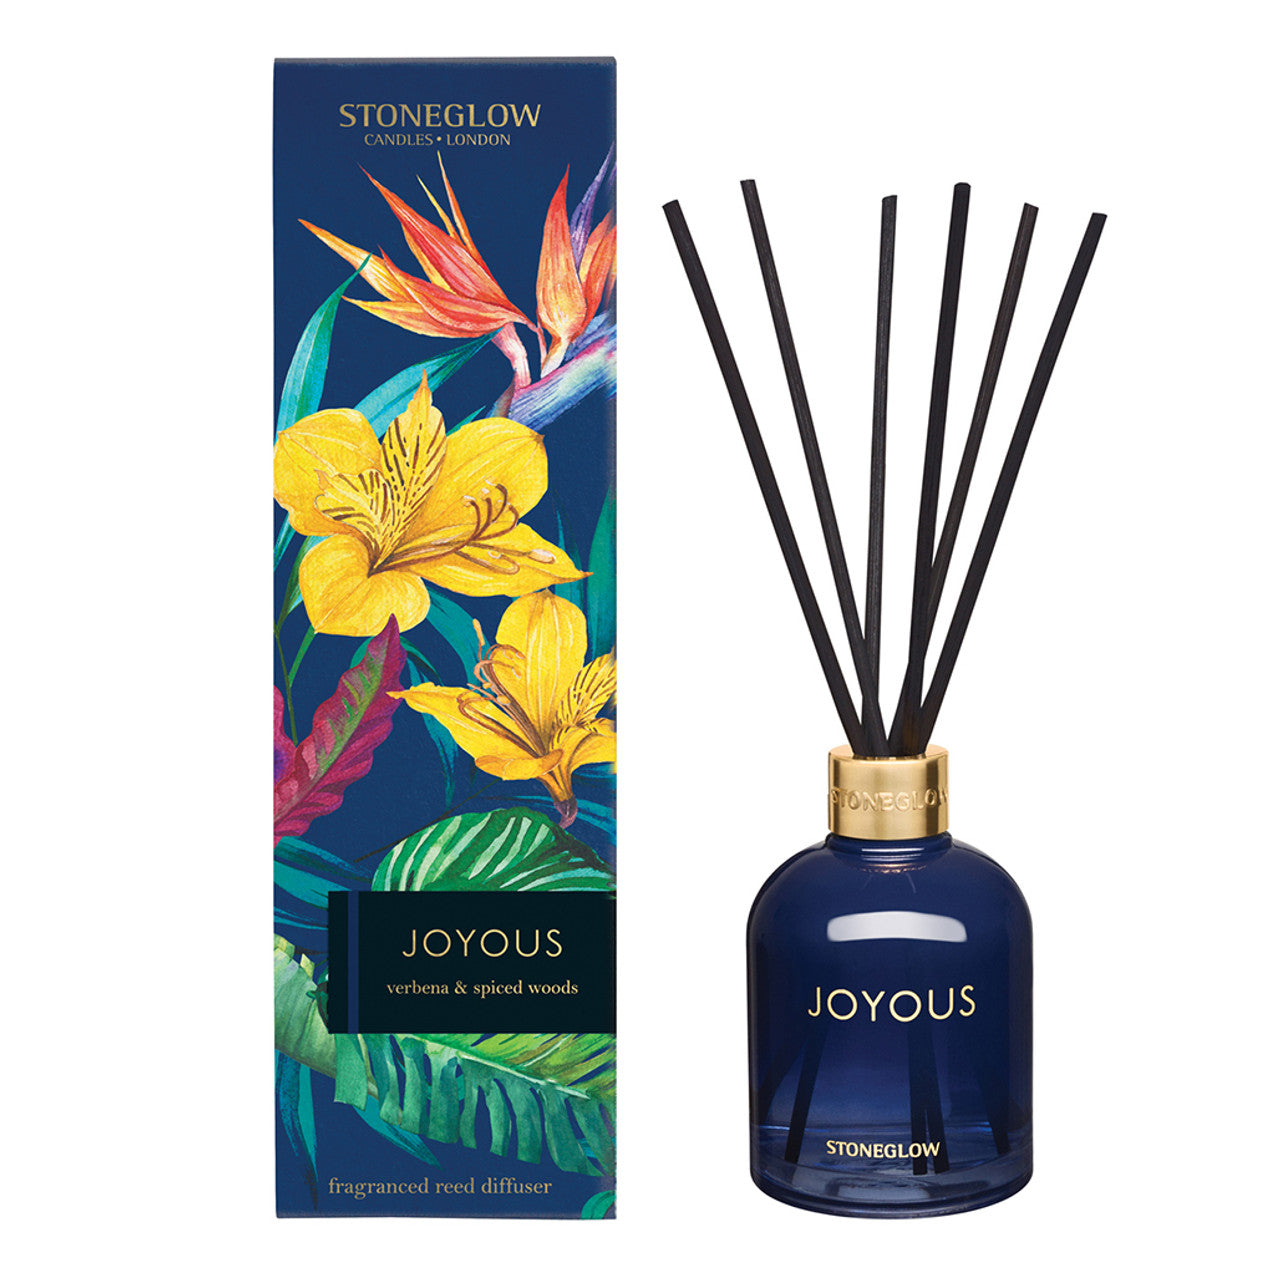 Stoneglow Infusion Joyous - Verbena & Spiced Woods Reed Diffuser 150ml